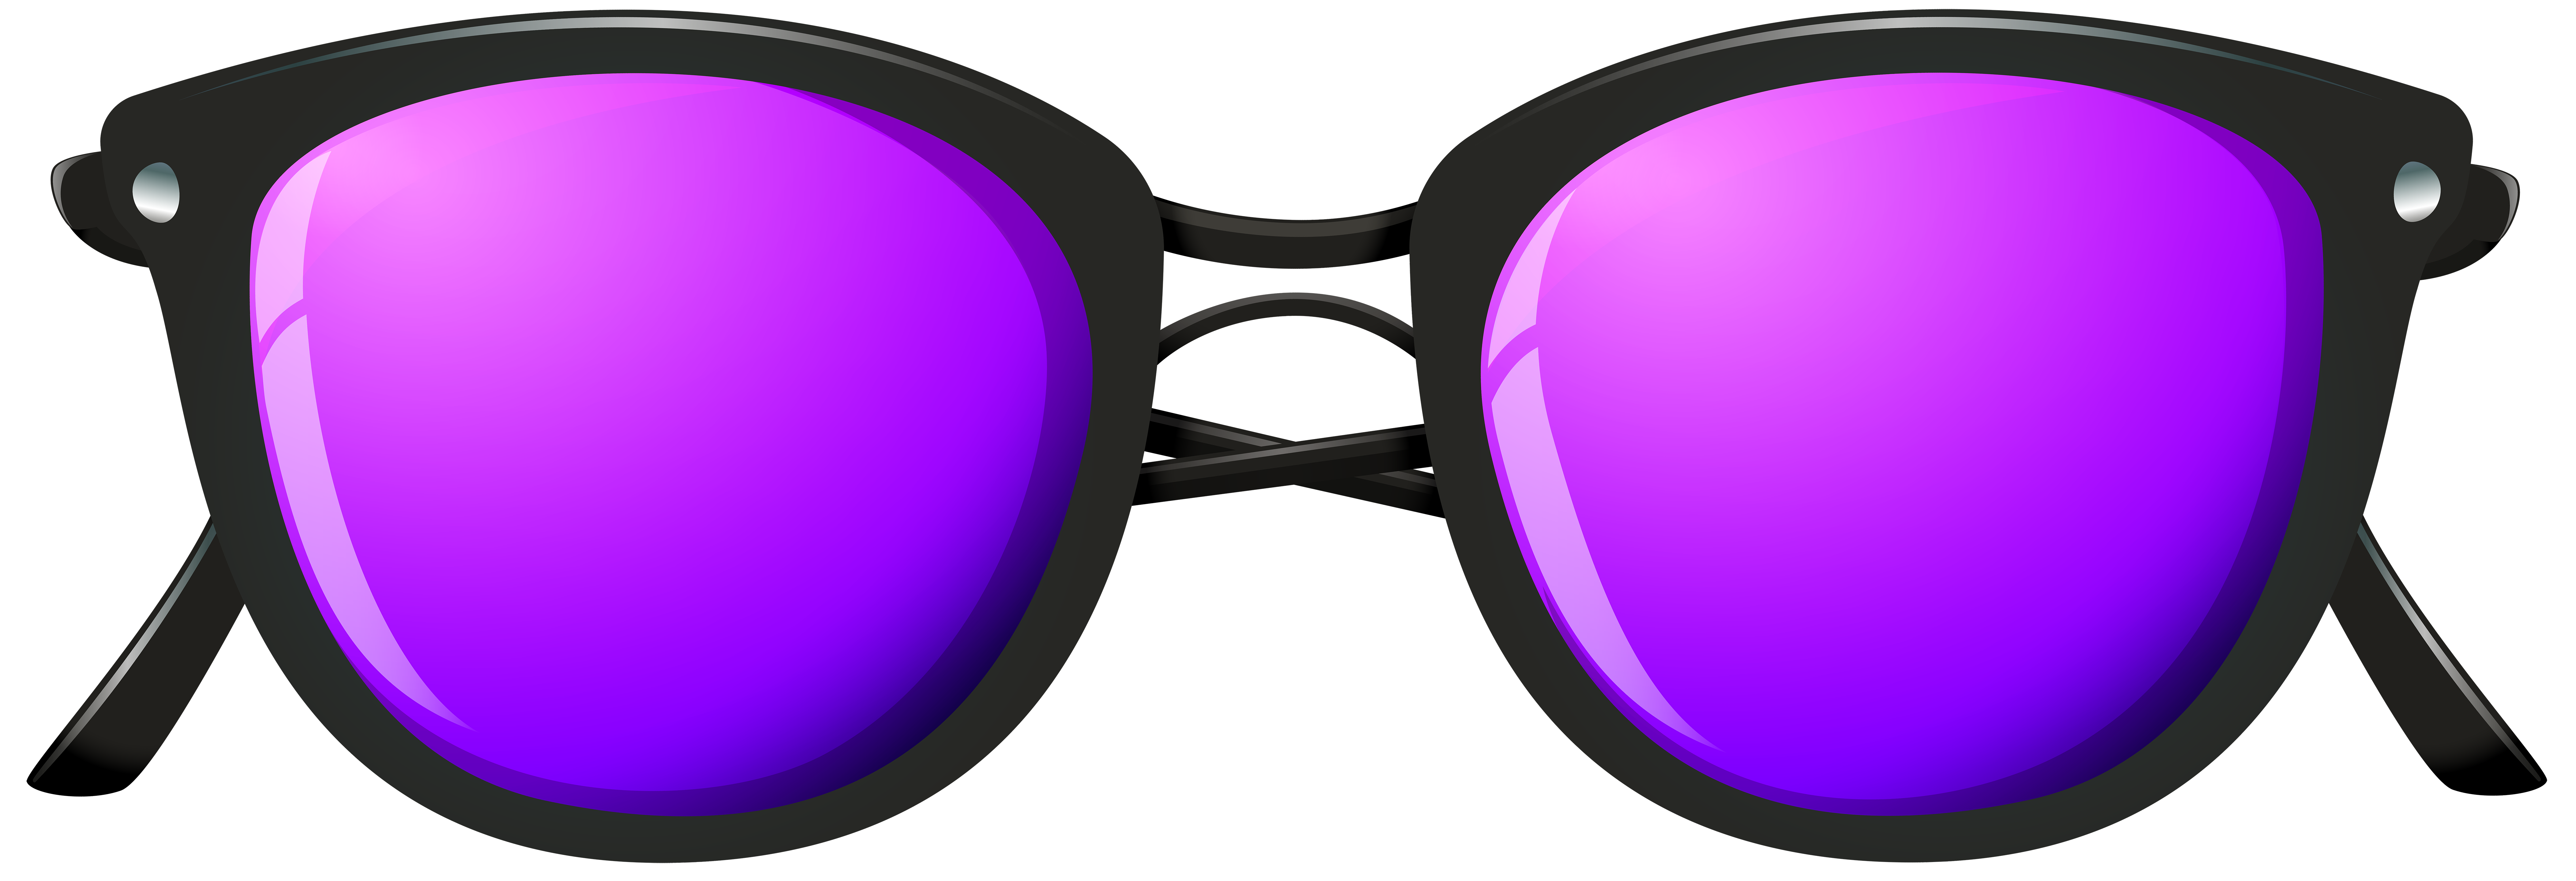 Magenta png image gallery. Sunglasses clipart purple